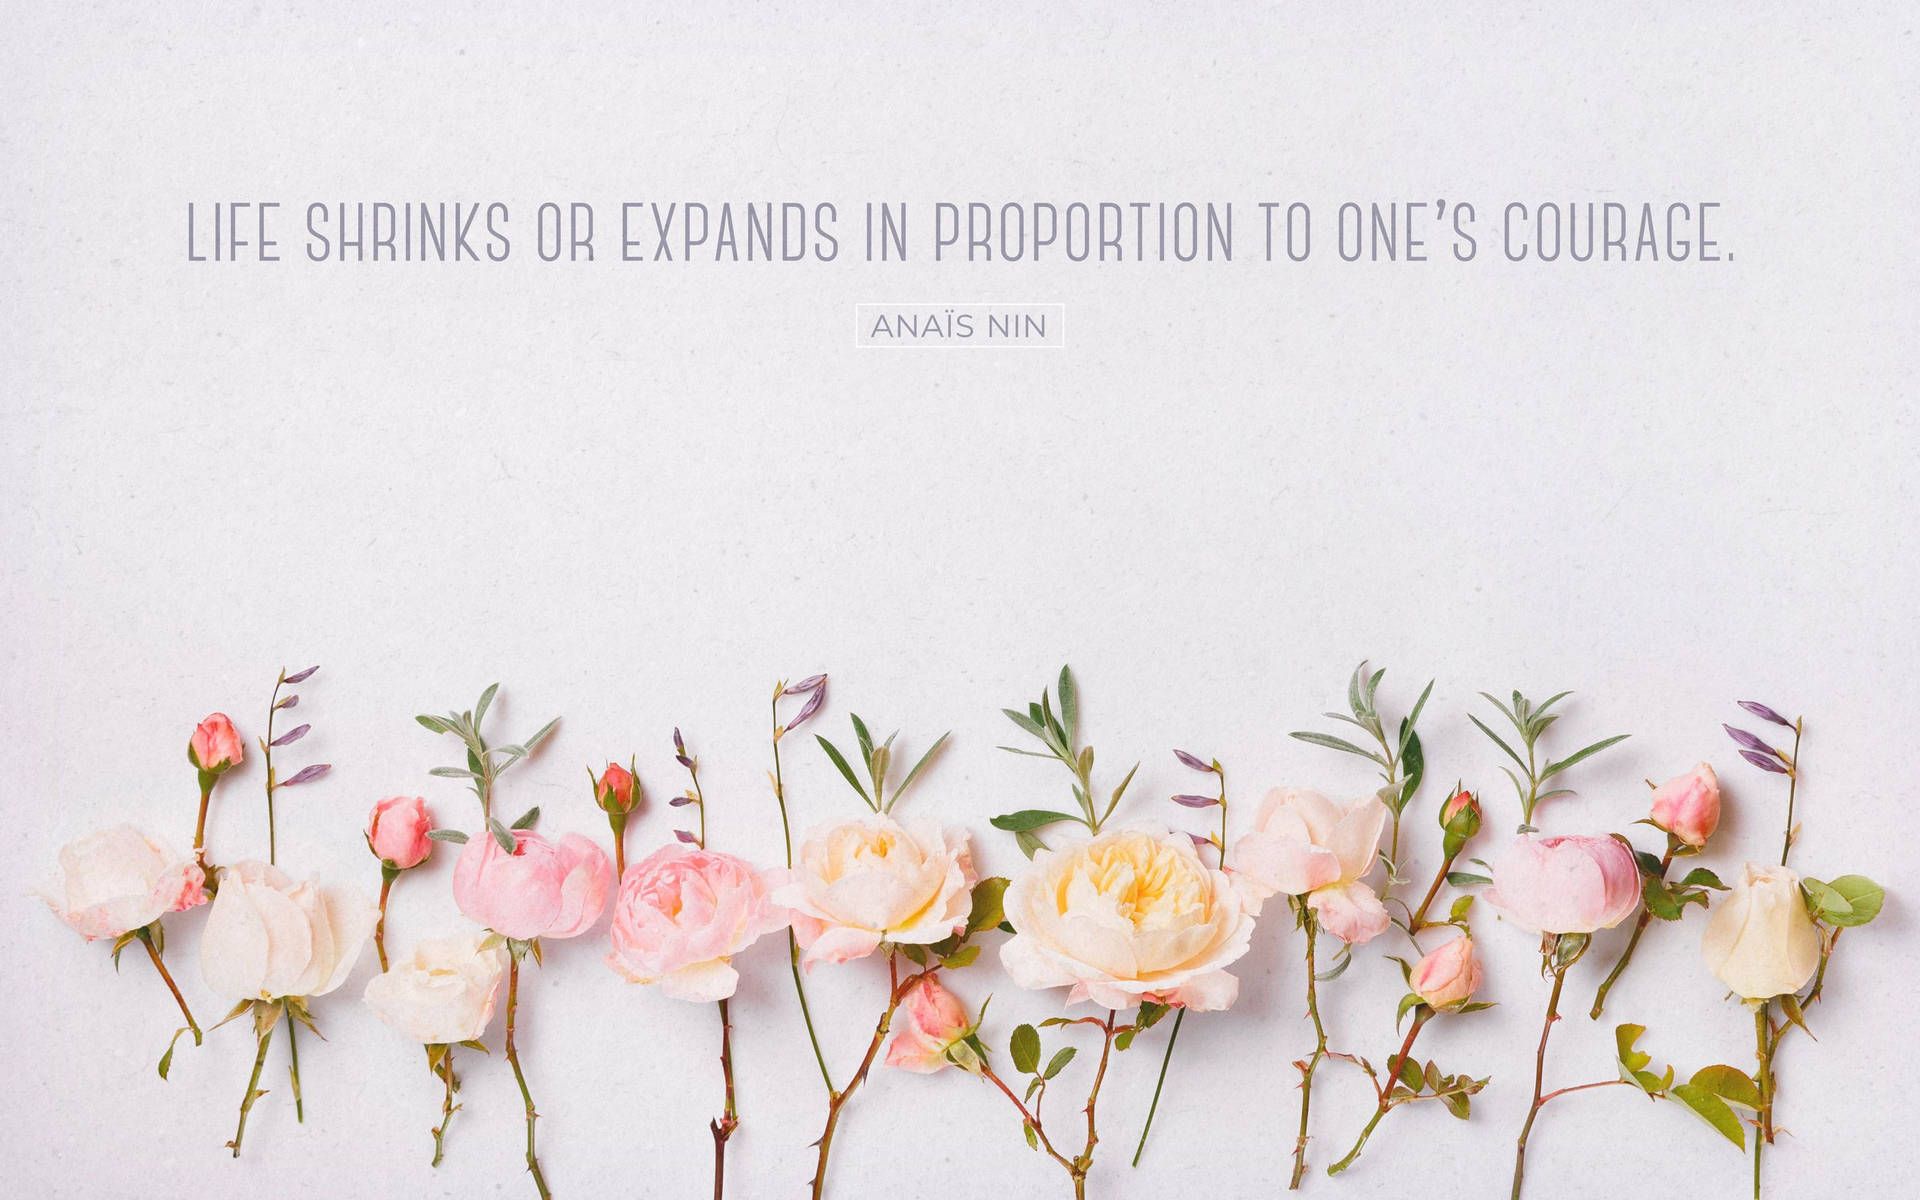 A white background with a row of pink and white flowers in the foreground. Above the flowers is a quote that says 